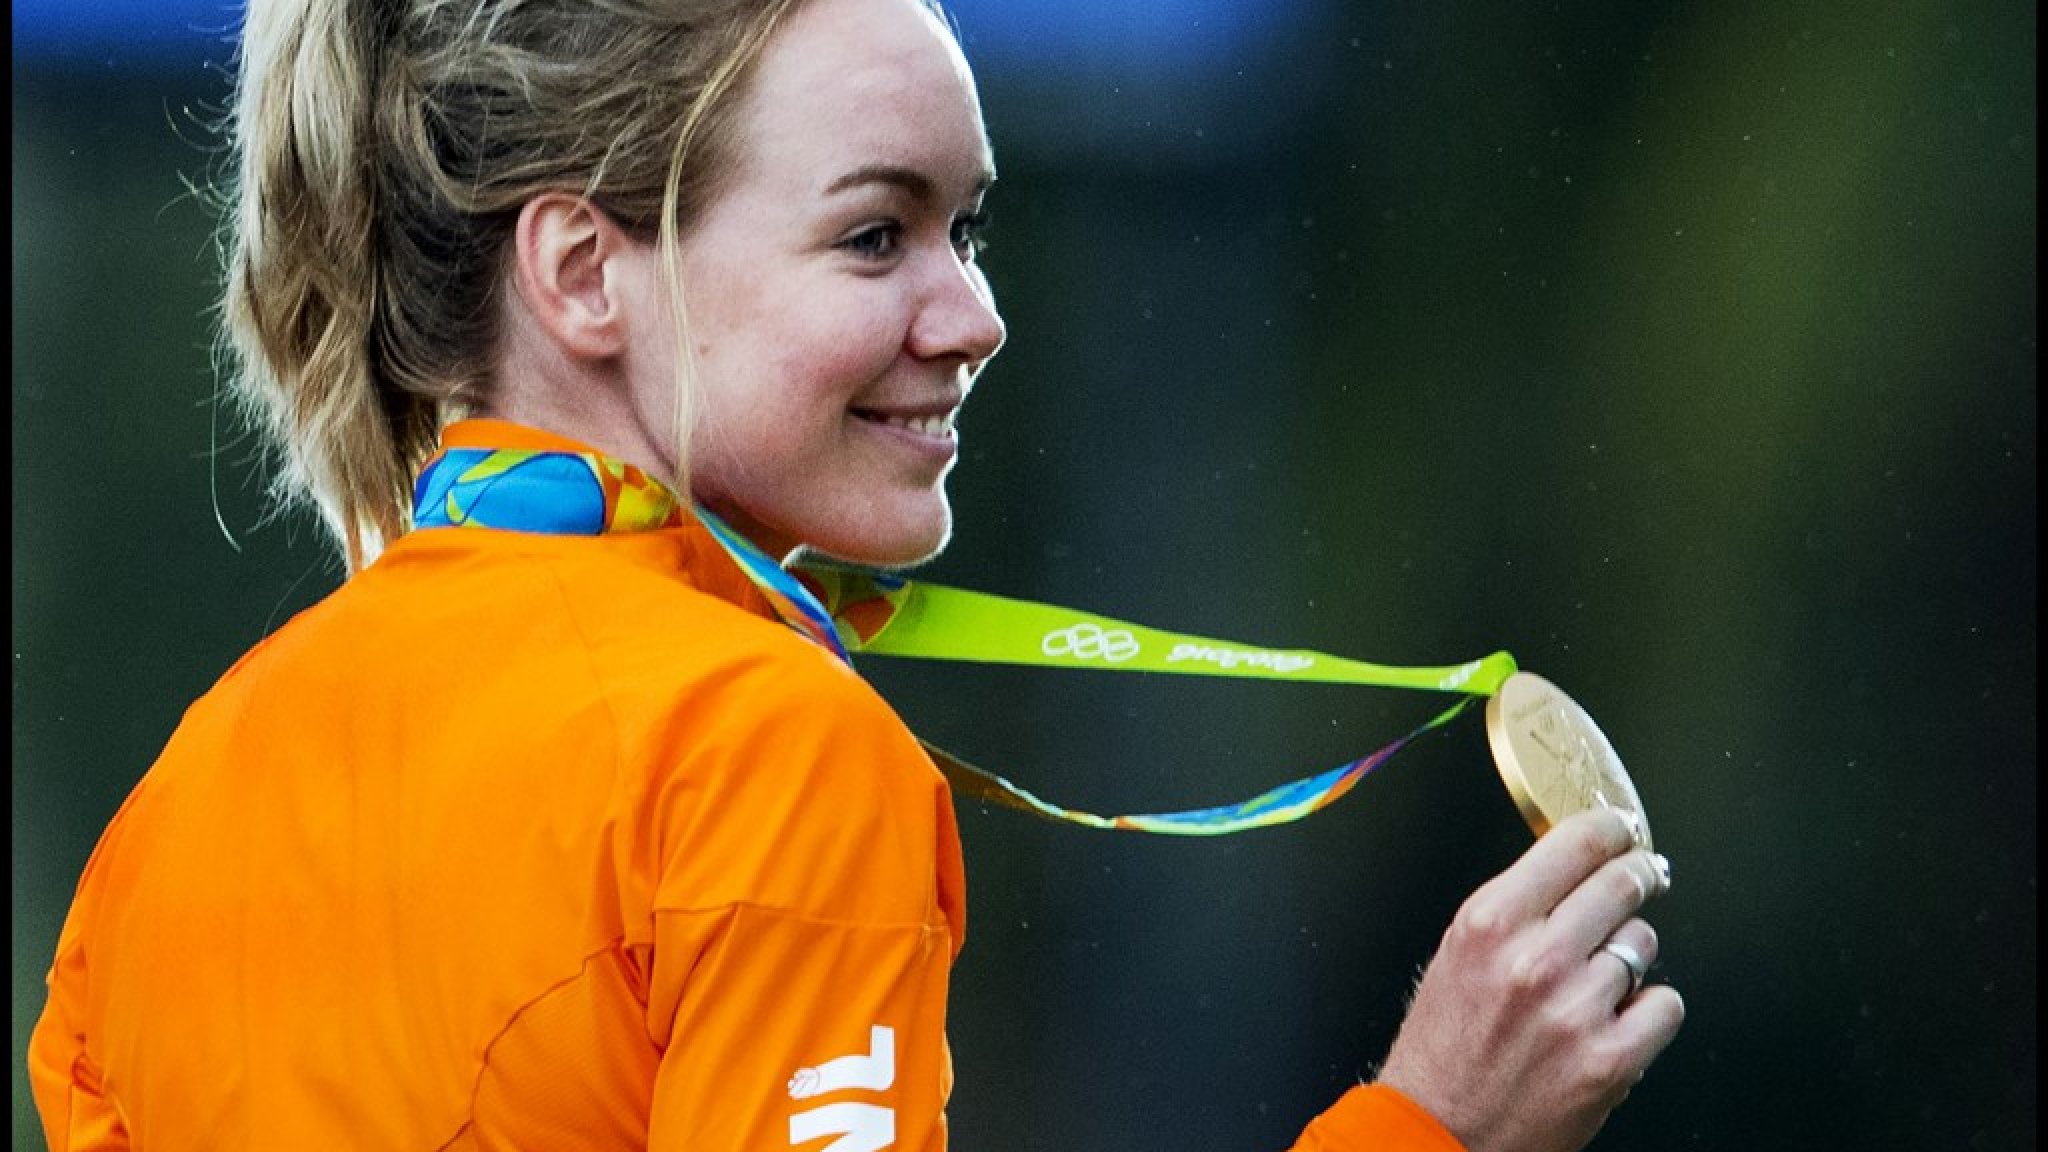 "The Netherlands wins a record number of medals at the Tokyo Olympic Games"